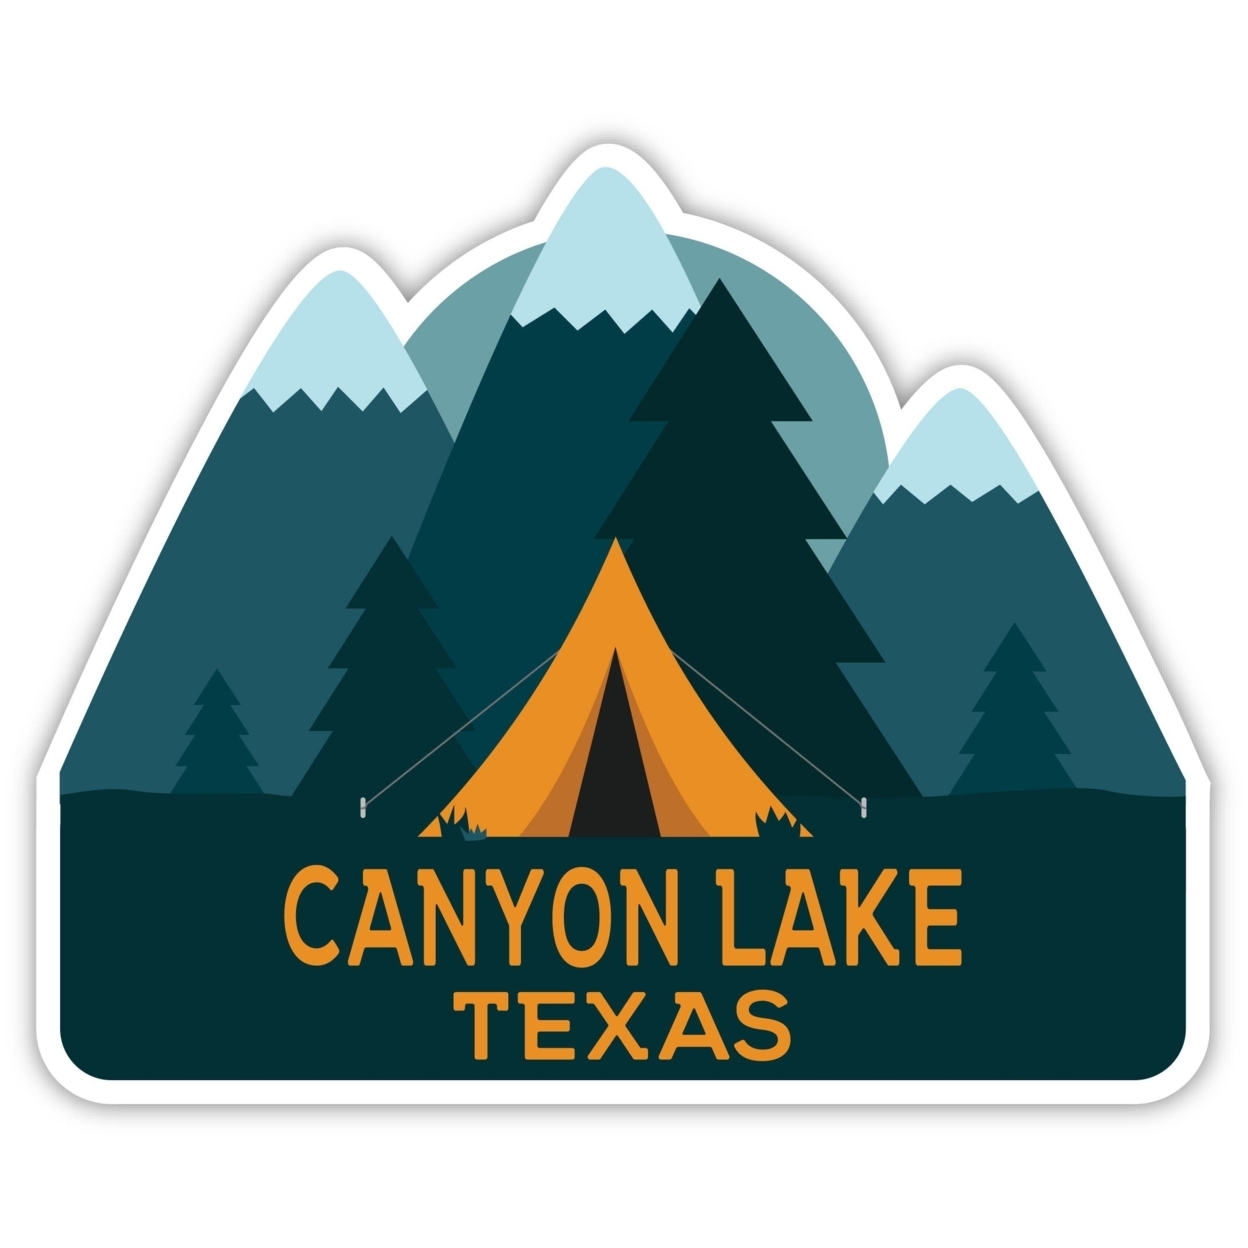 Canyon Lake Texas Souvenir Decorative Stickers (Choose Theme And Size) - 4-Pack, 2-Inch, Tent